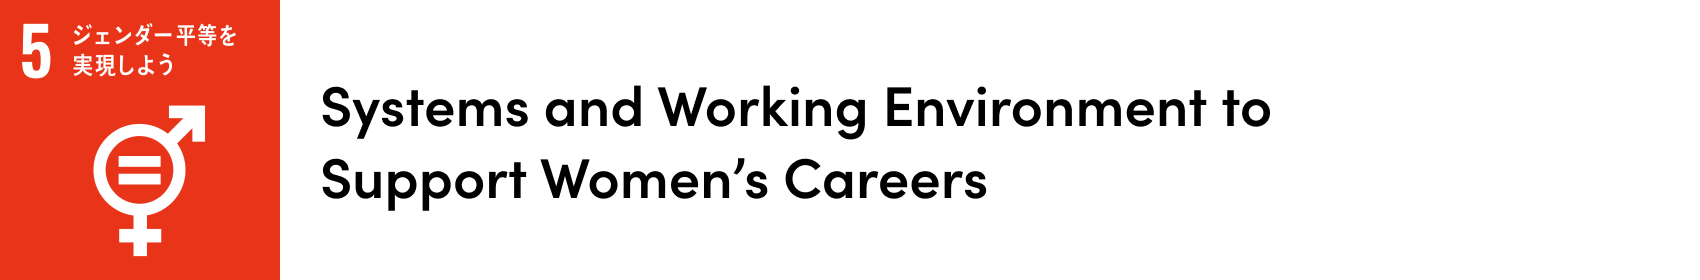 Systems and Working Environment to Support Women’s Careers